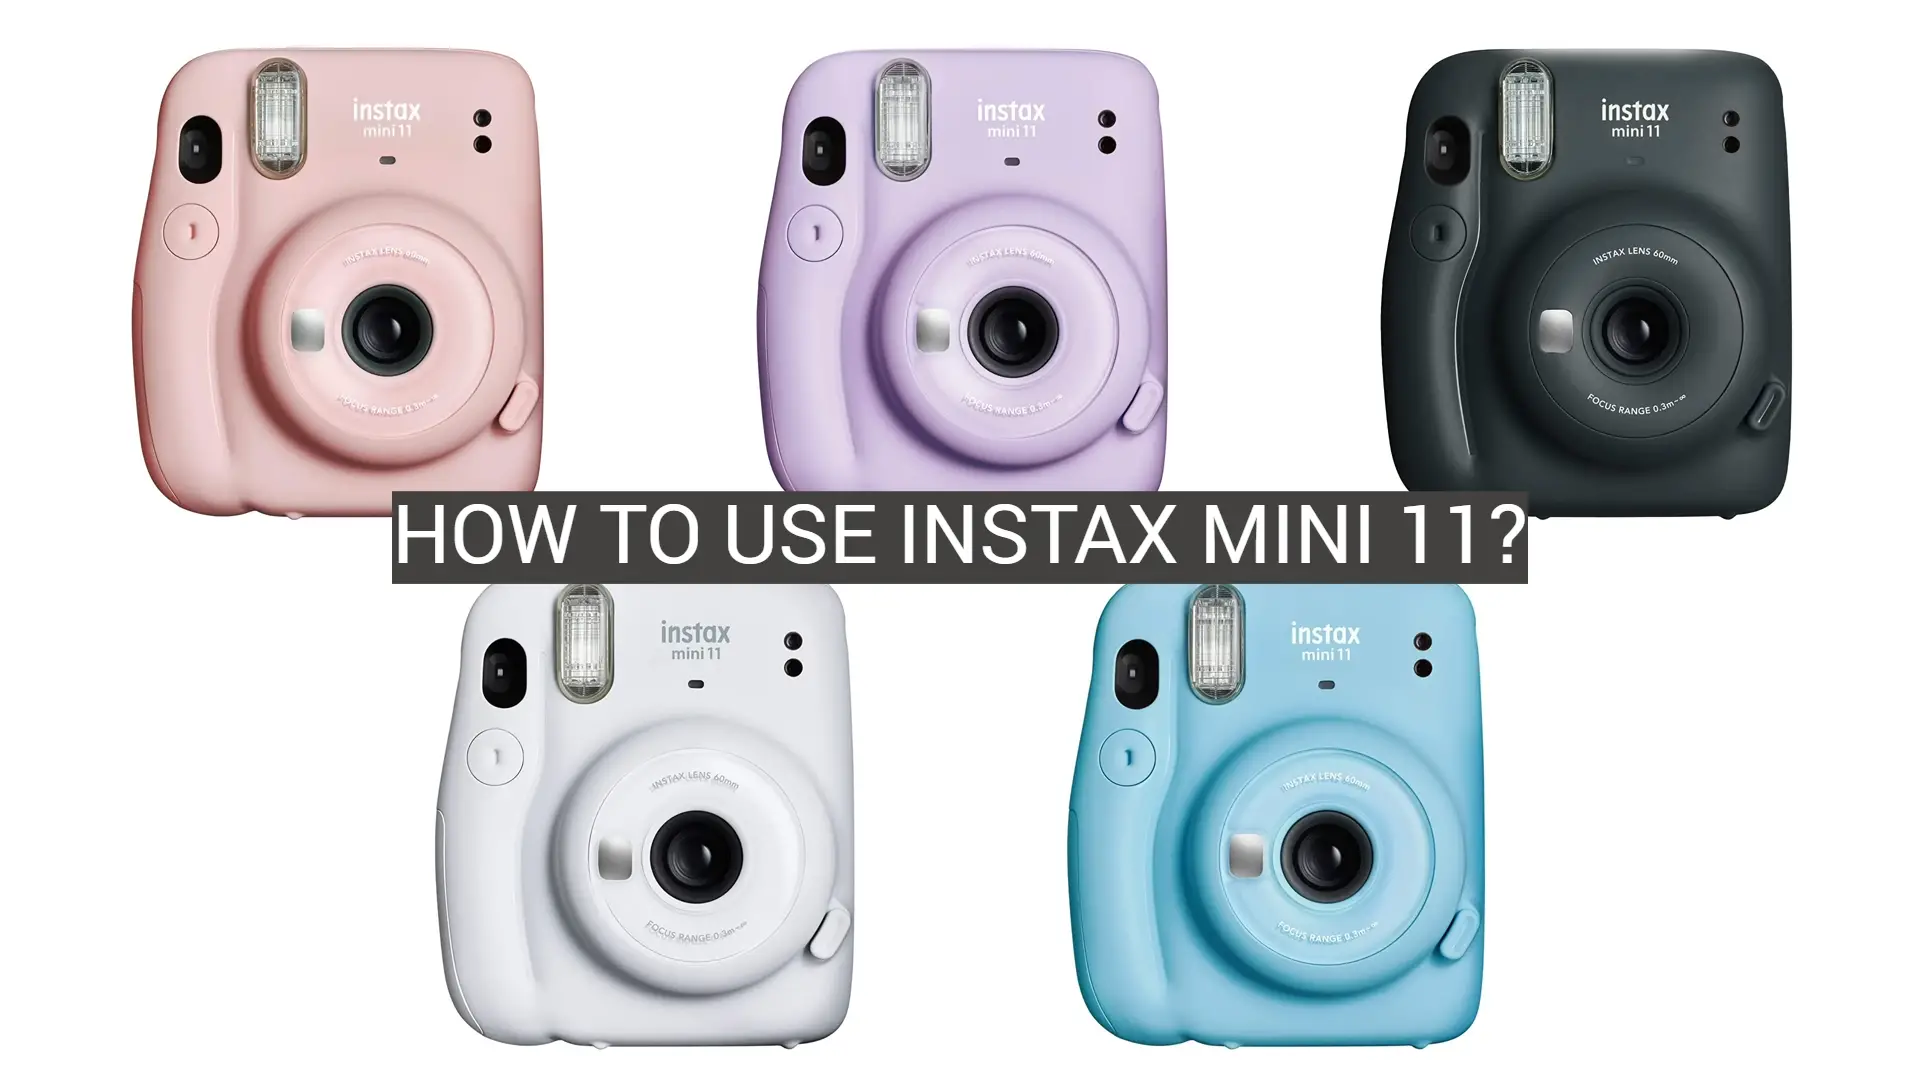 How to Use Instax Mini 11?